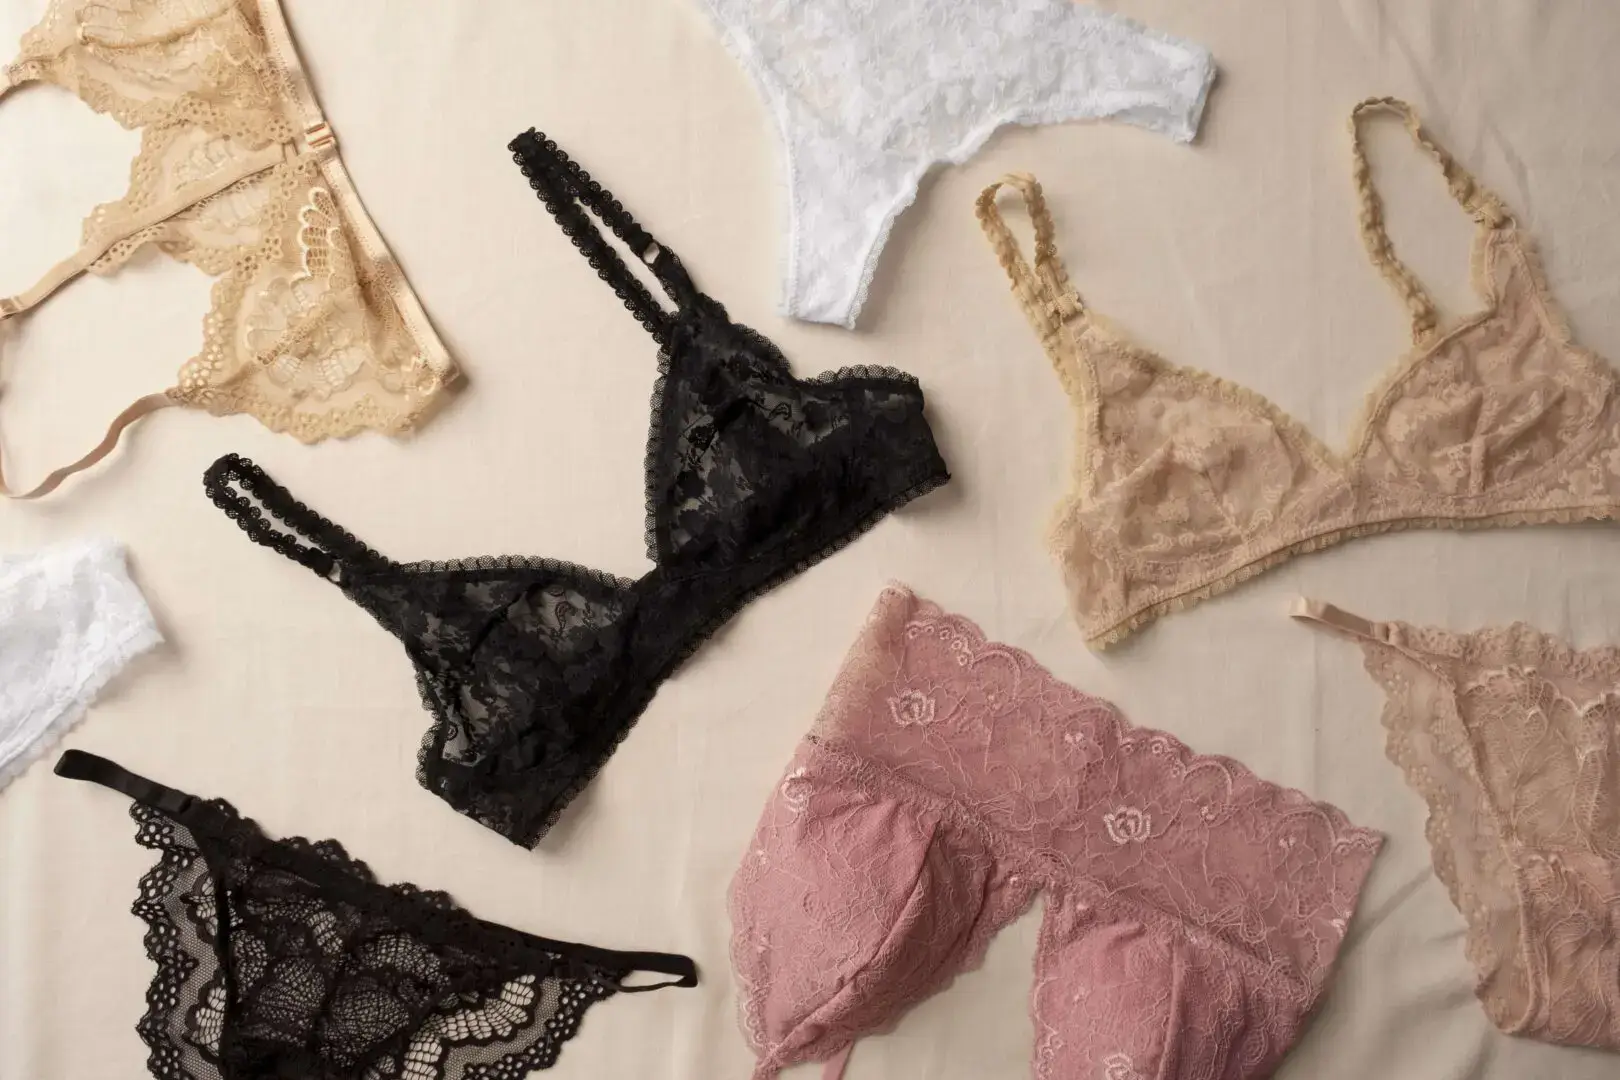 Online lingerie store: Your step-by-step launch guide